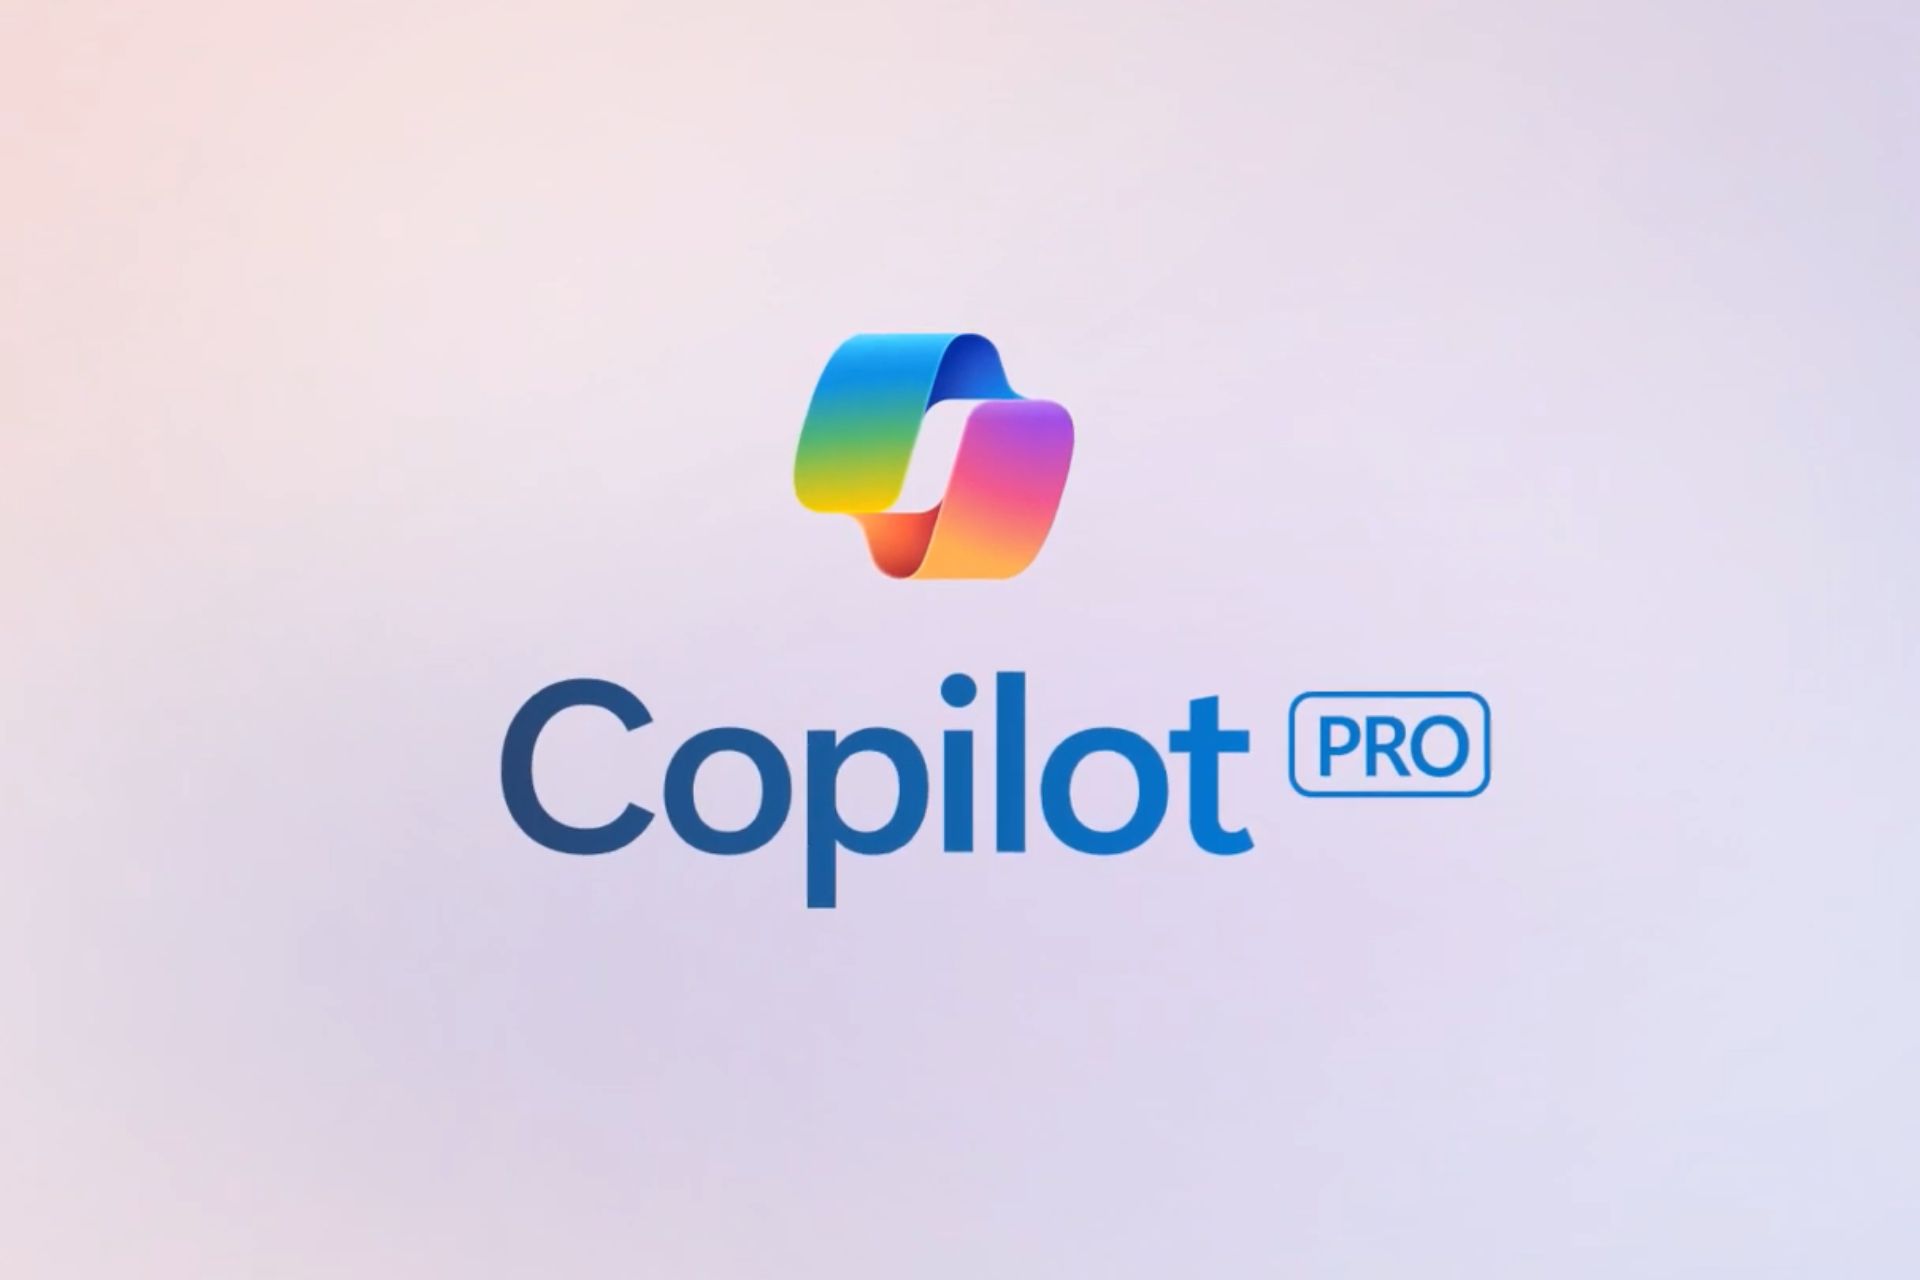 Copilot Pro is here and for $20/month, it entirely transforms the AI  experience